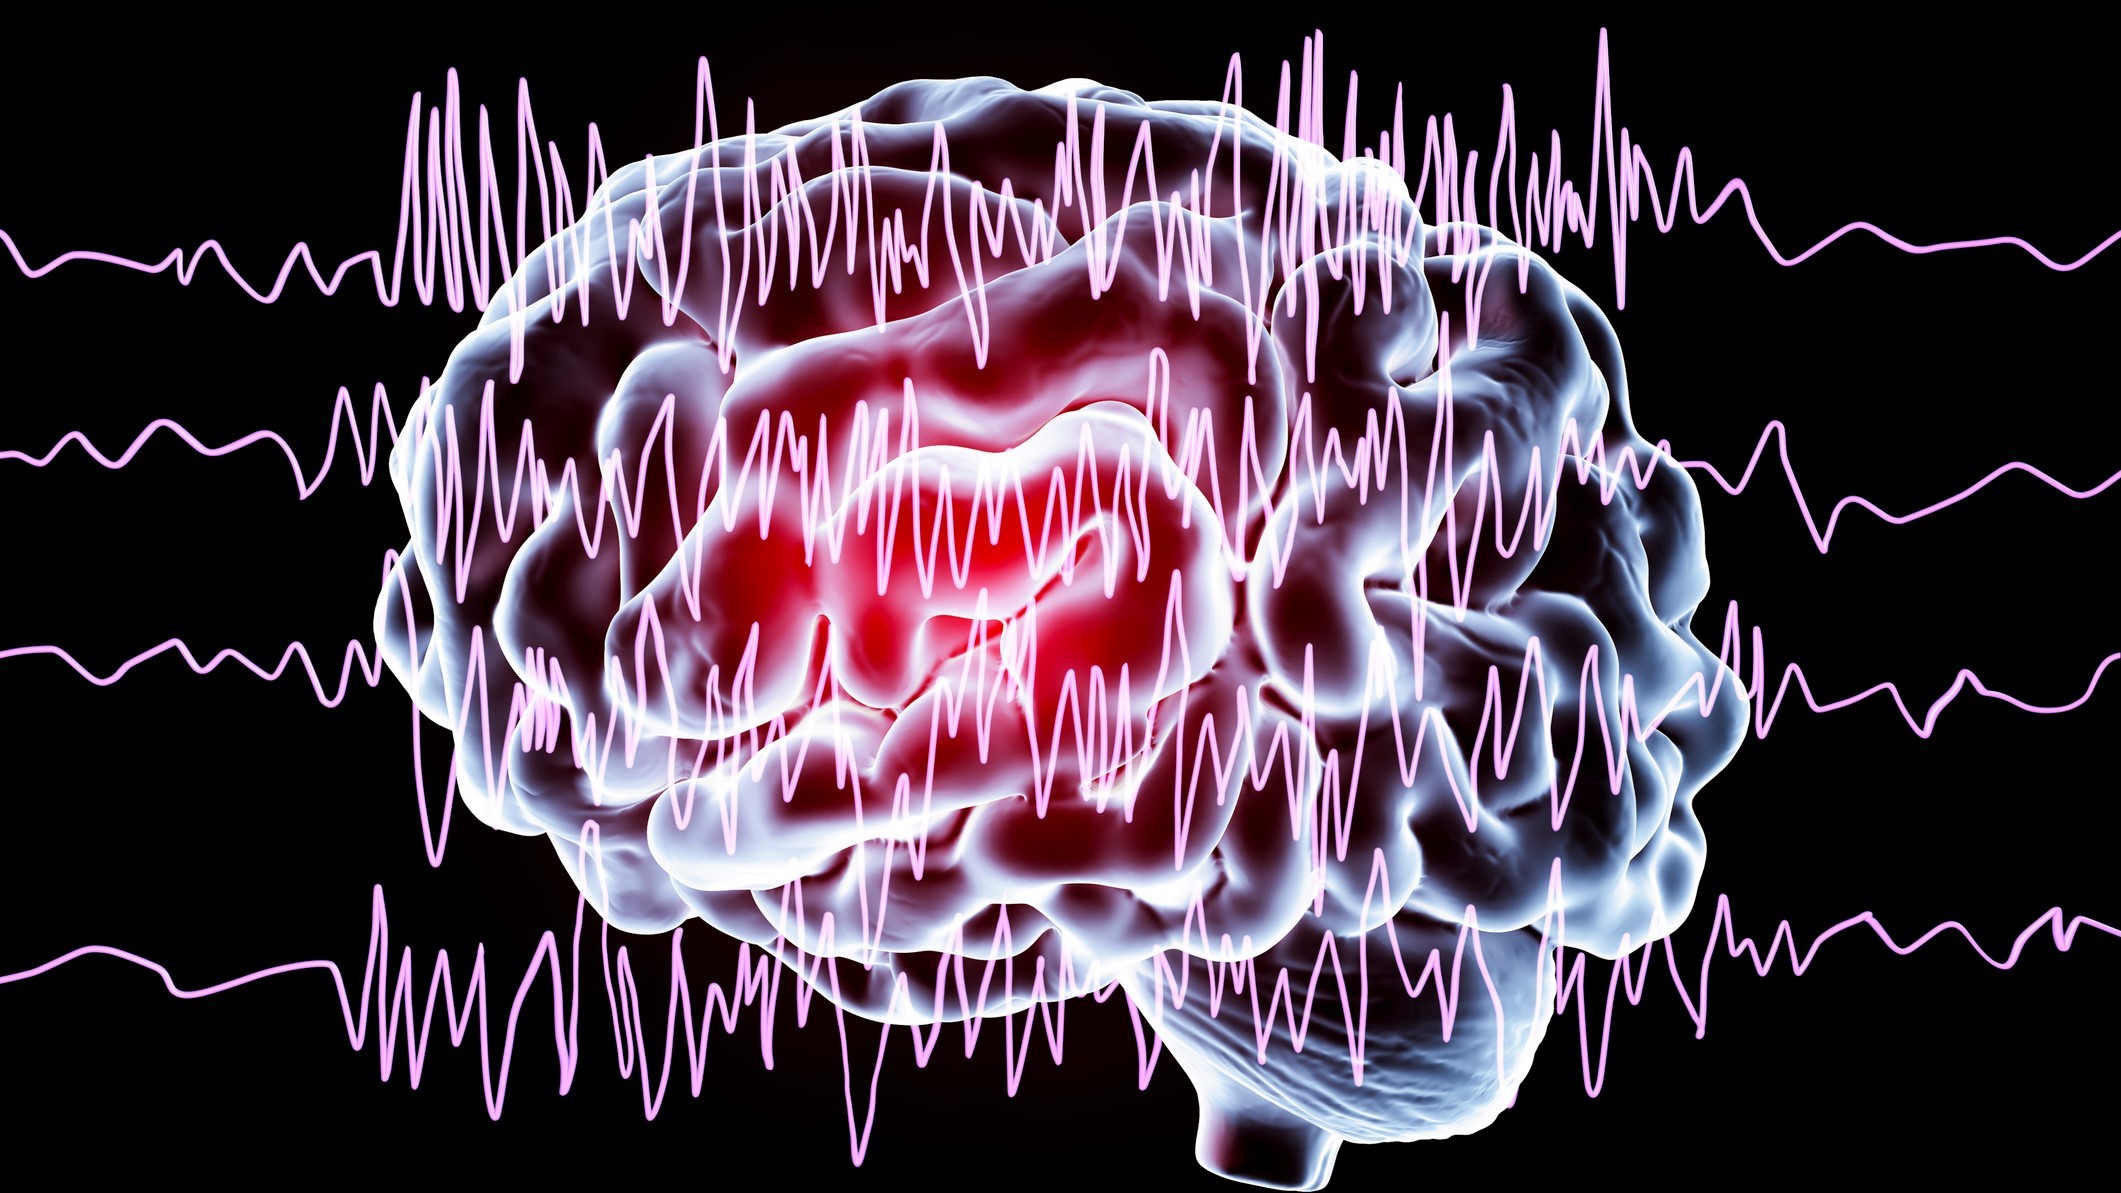 High-tech epilepsy warning device could save lives